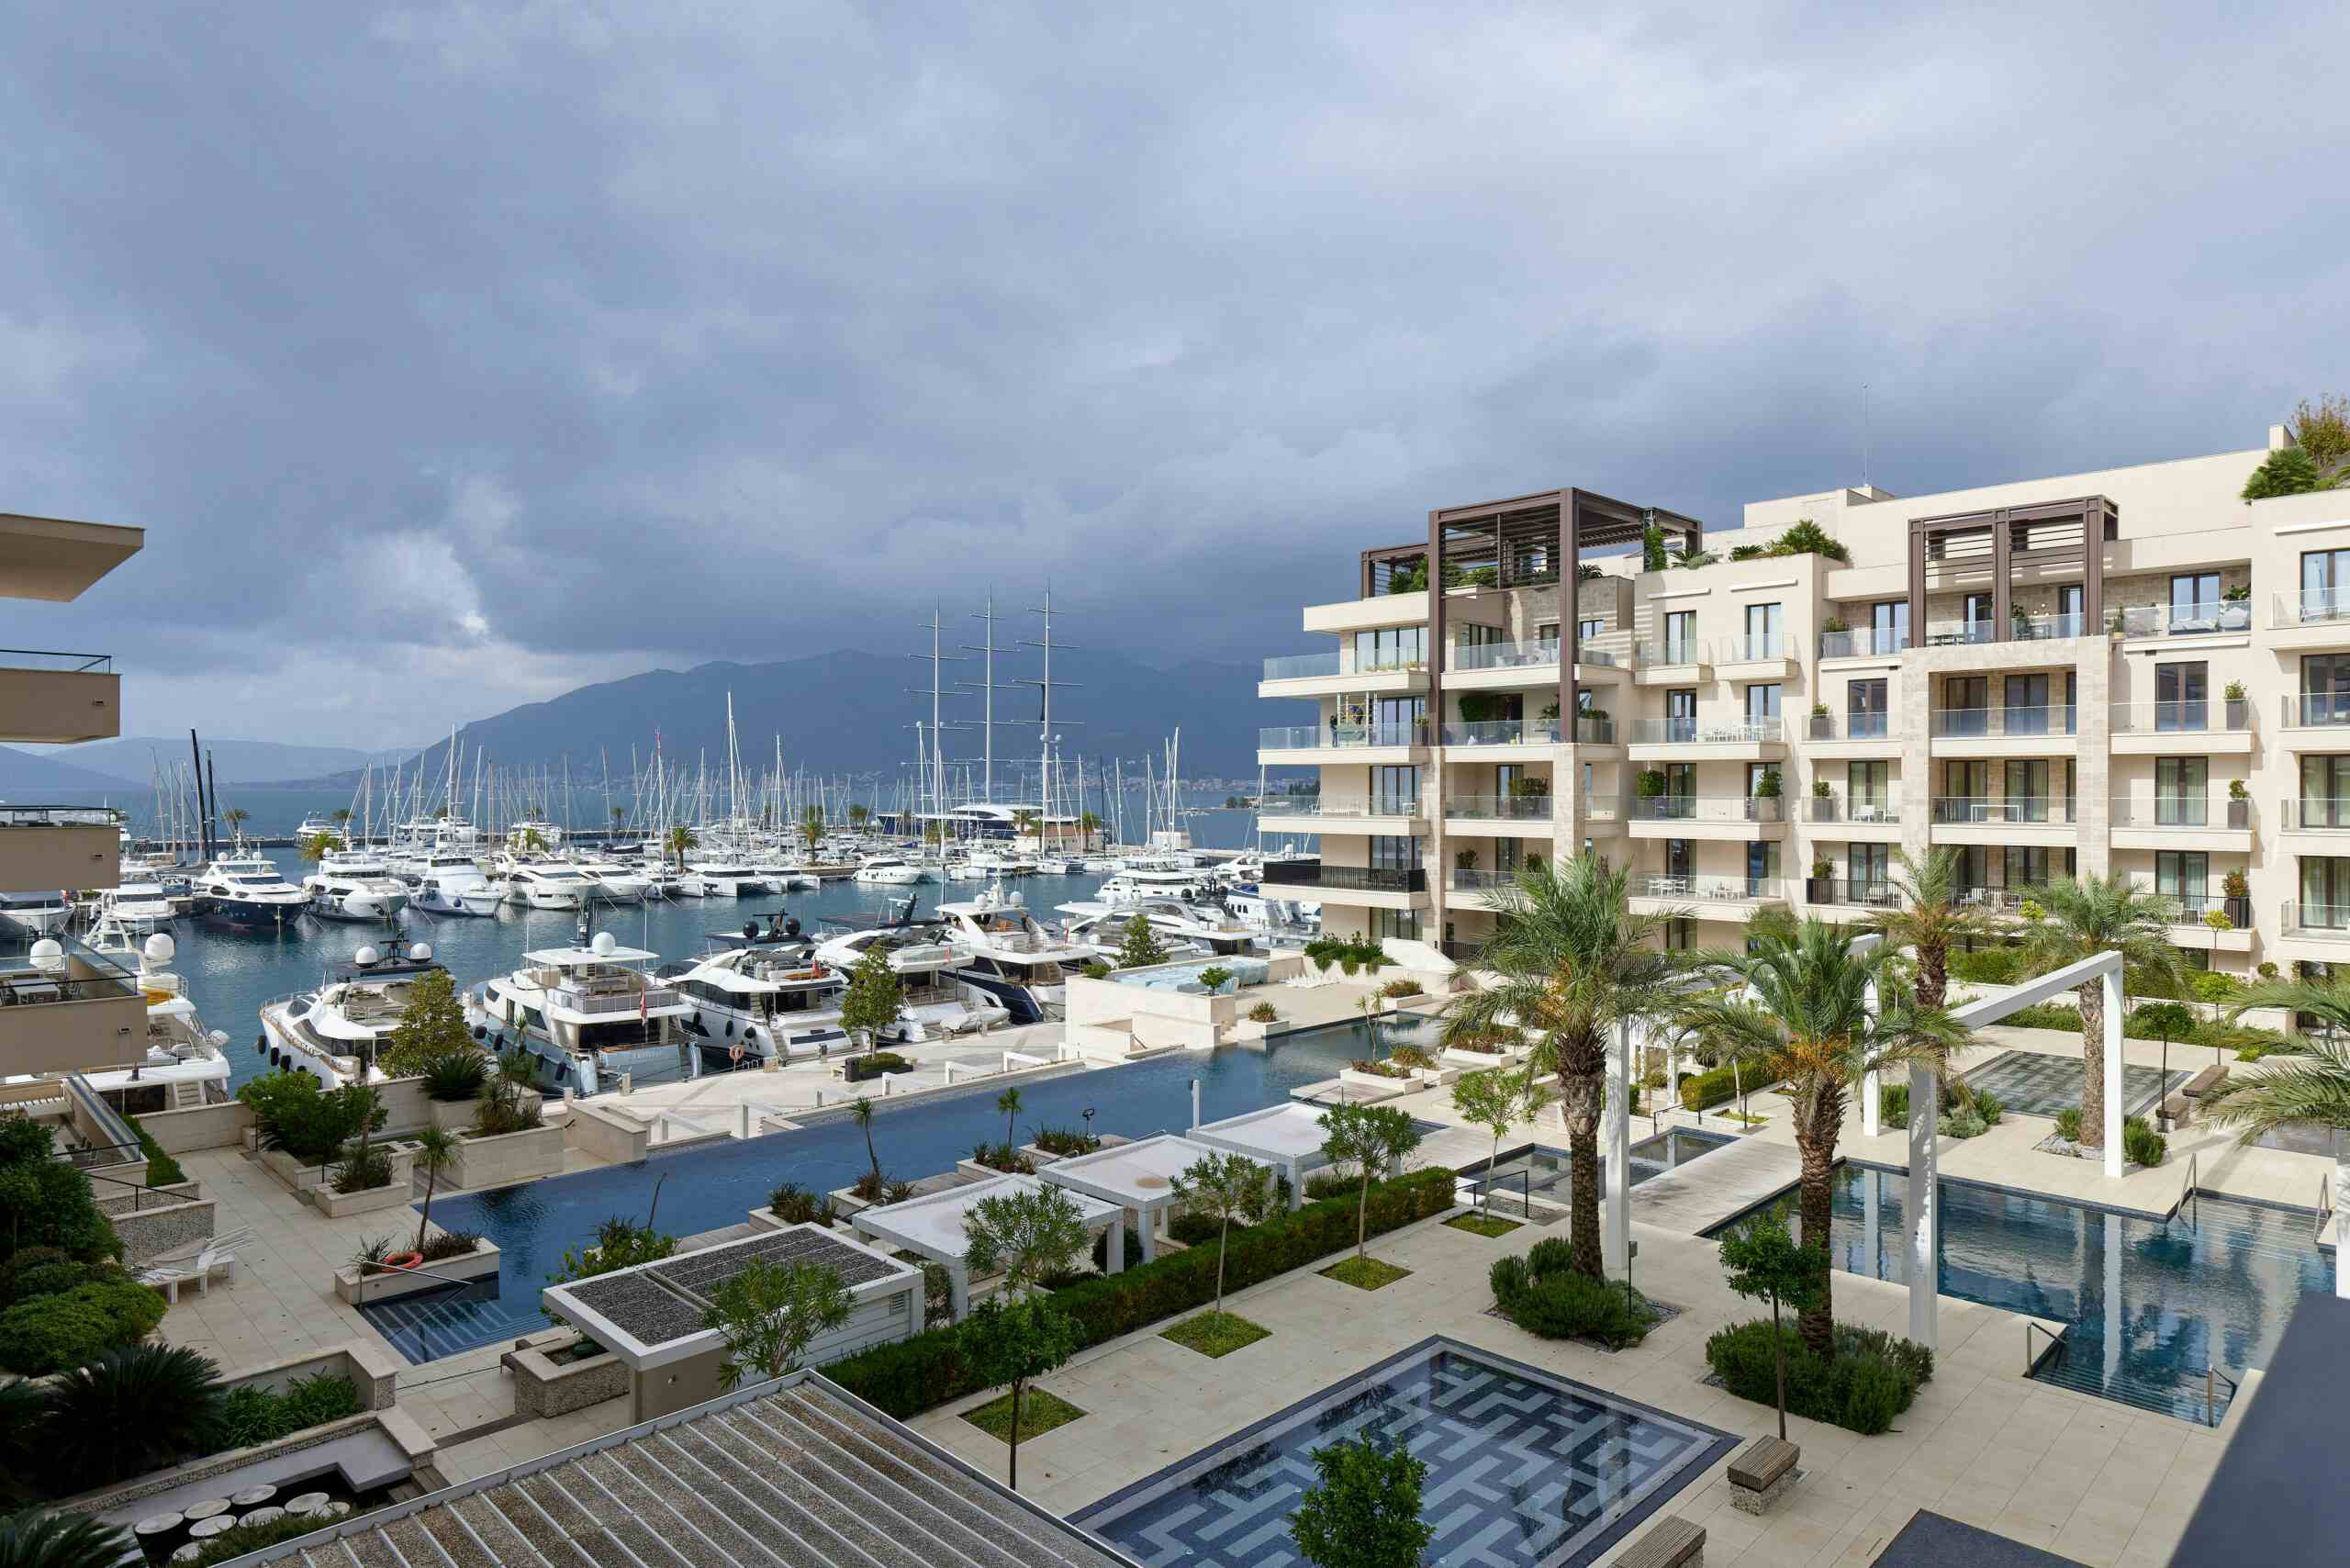 Three-bedroom apartment available for sale at Aqua residence, Porto Montenegro